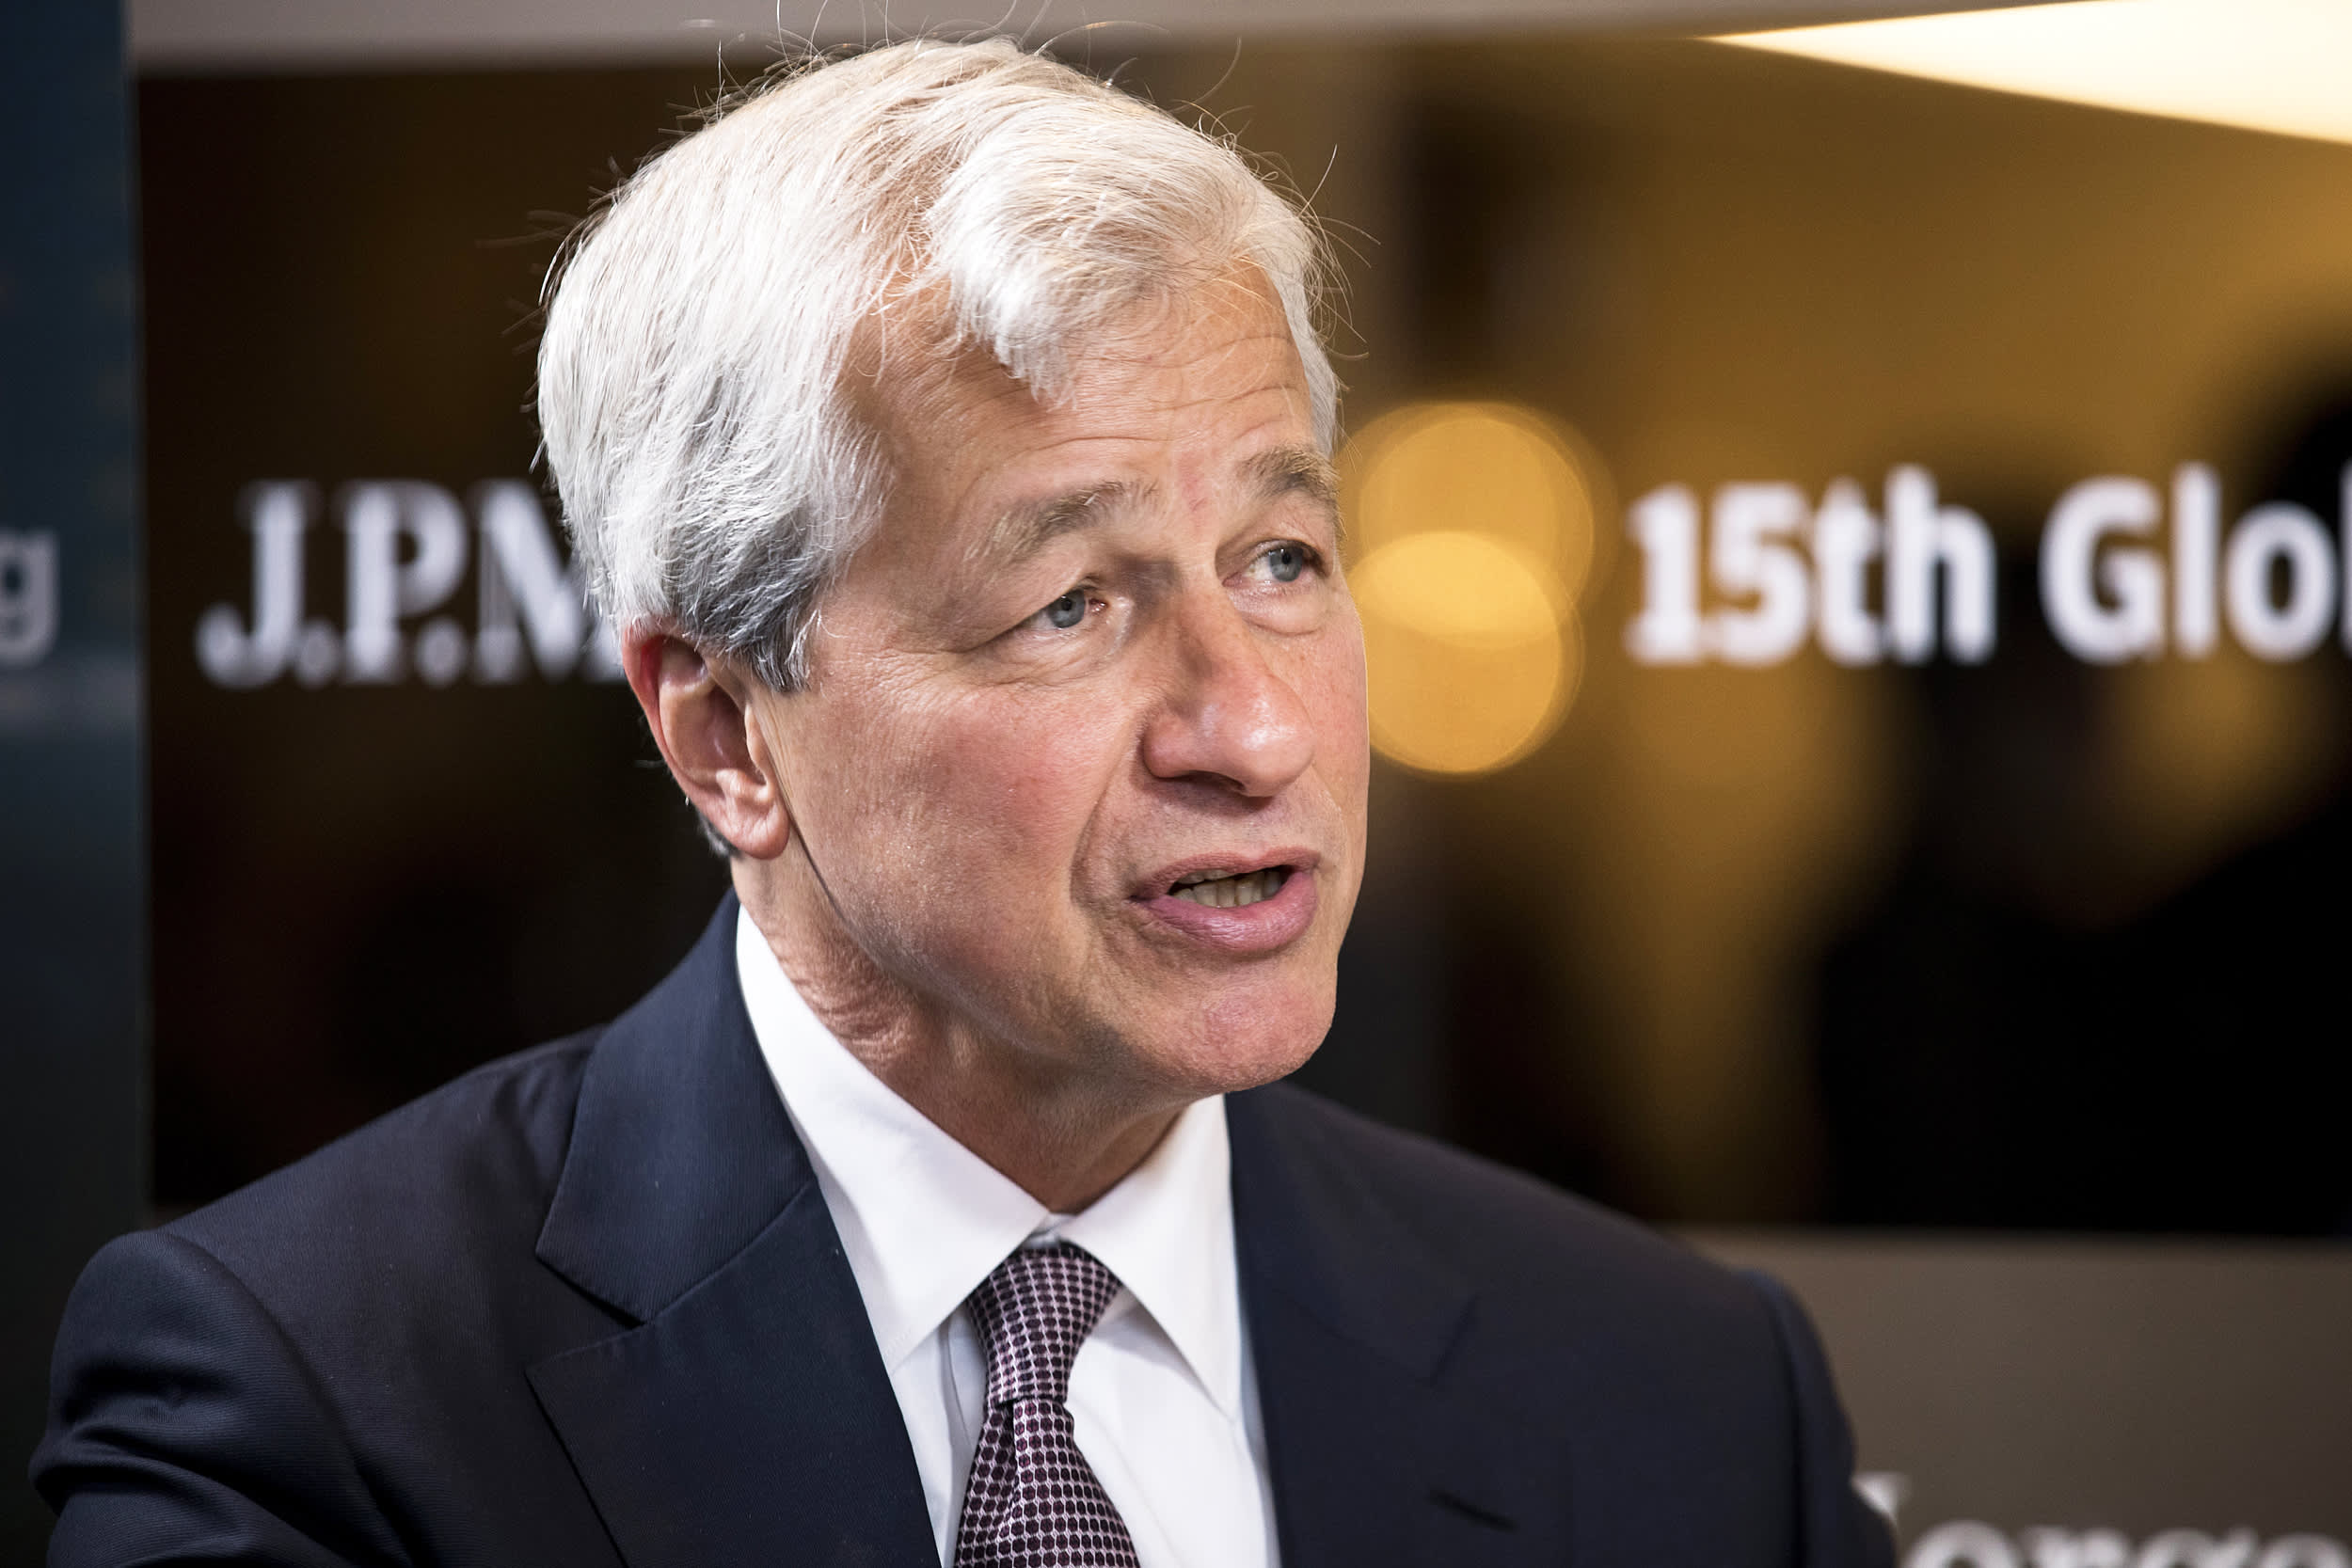 JPMorgan Chase is set to report second-quarter earnings – here's what the Street expects - CNBC